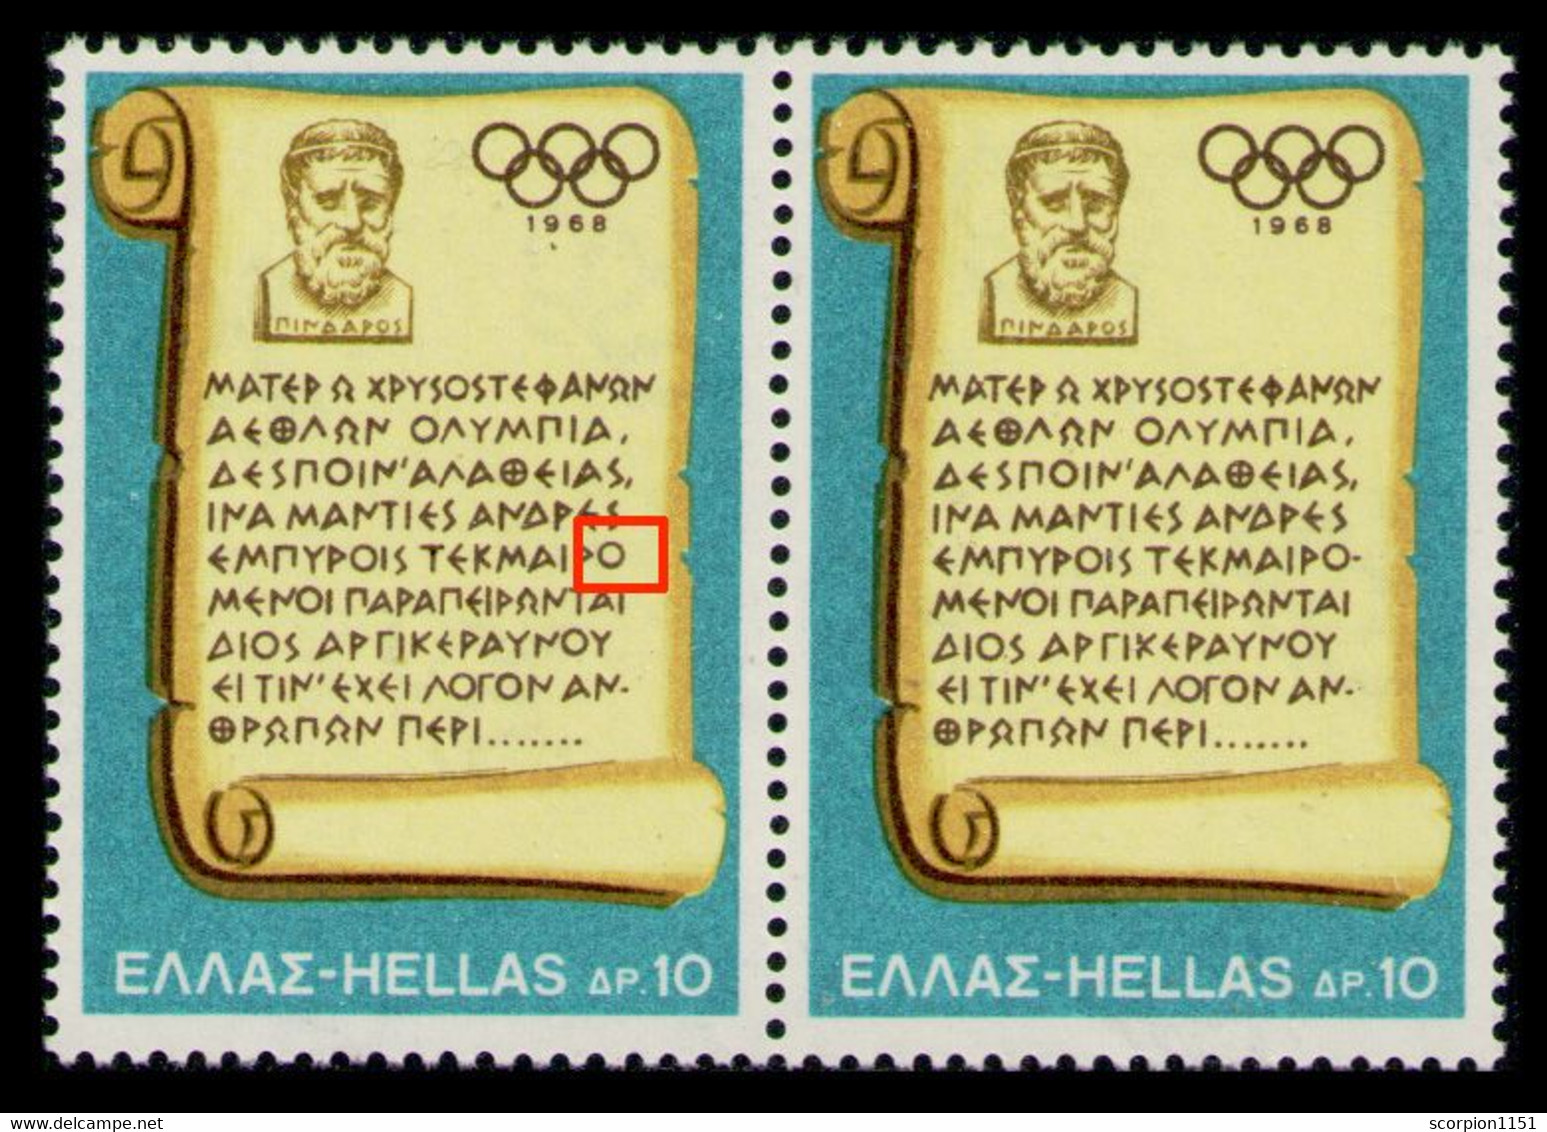 GREECE 1968 - ERROR No Dash After "O" At The Left Stamp RR In Pair - MNH** - Ungebraucht